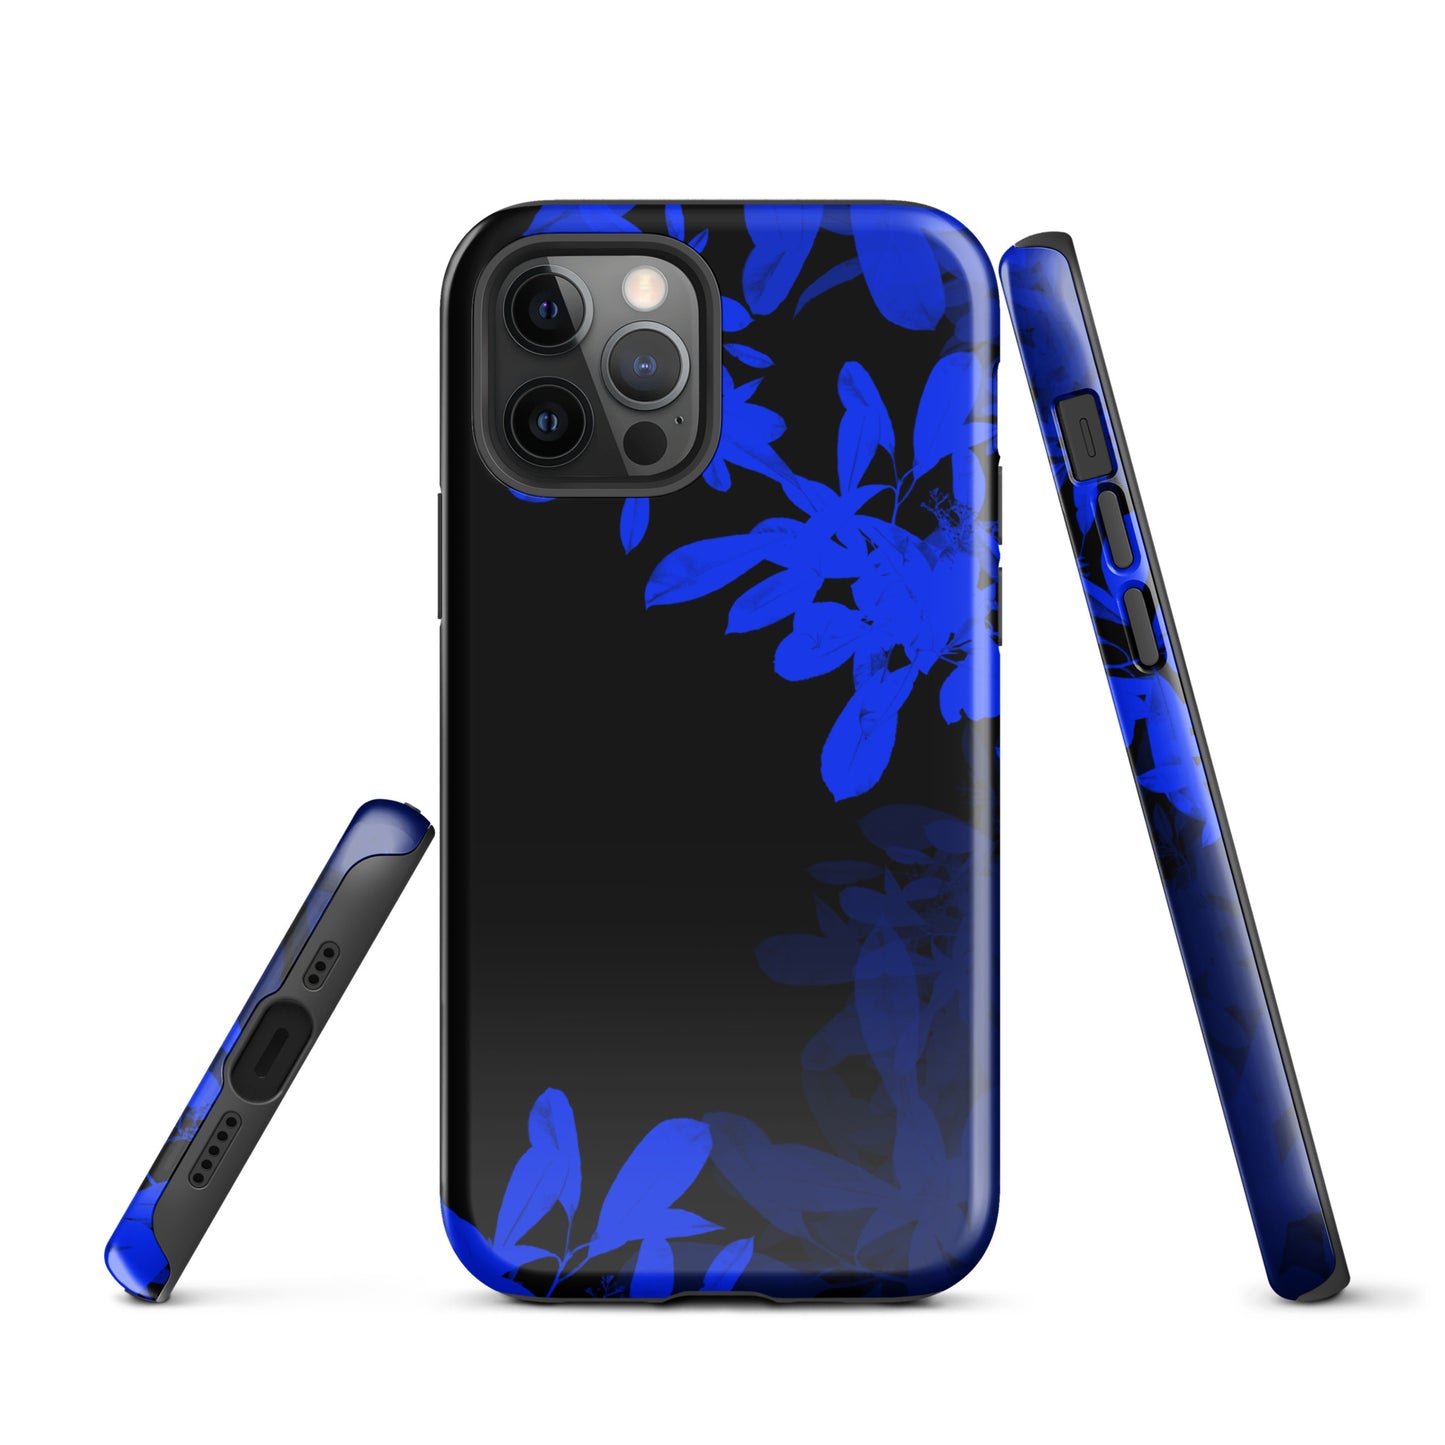 A Night Blue Plant Case for the iPhone 12 Pro 